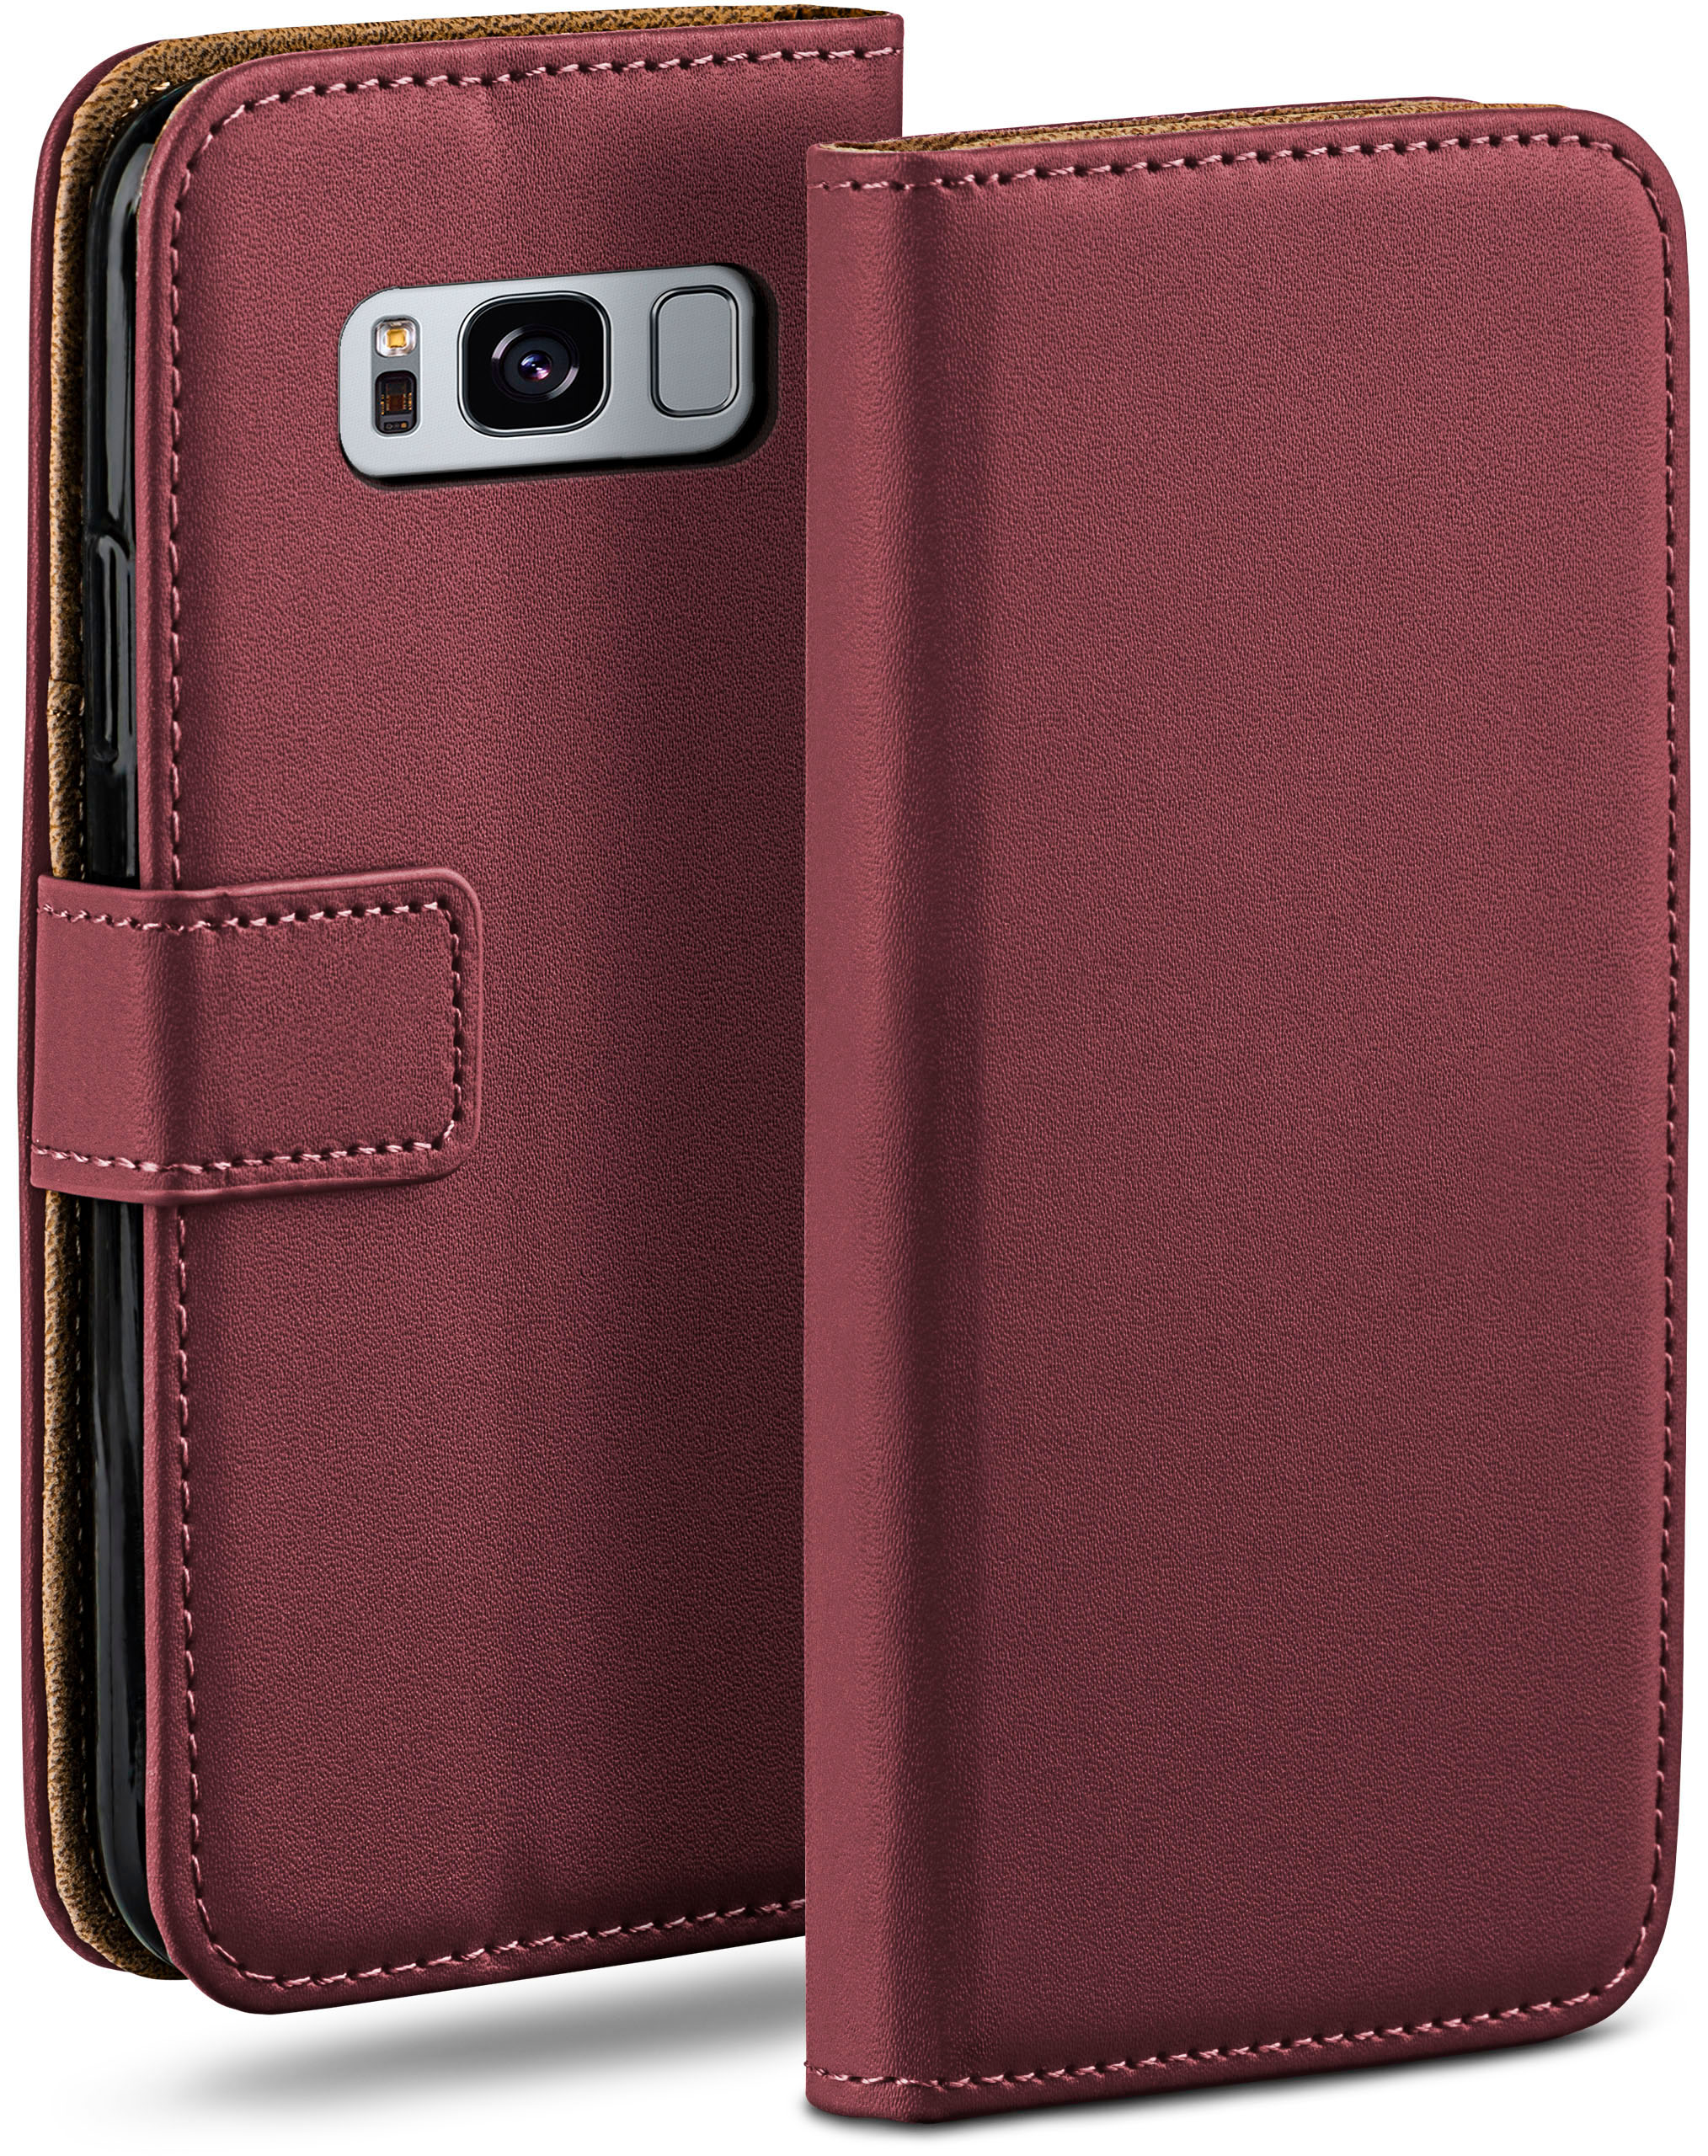 MOEX Book Case, Plus, Samsung, Maroon-Red Bookcover, Galaxy S8